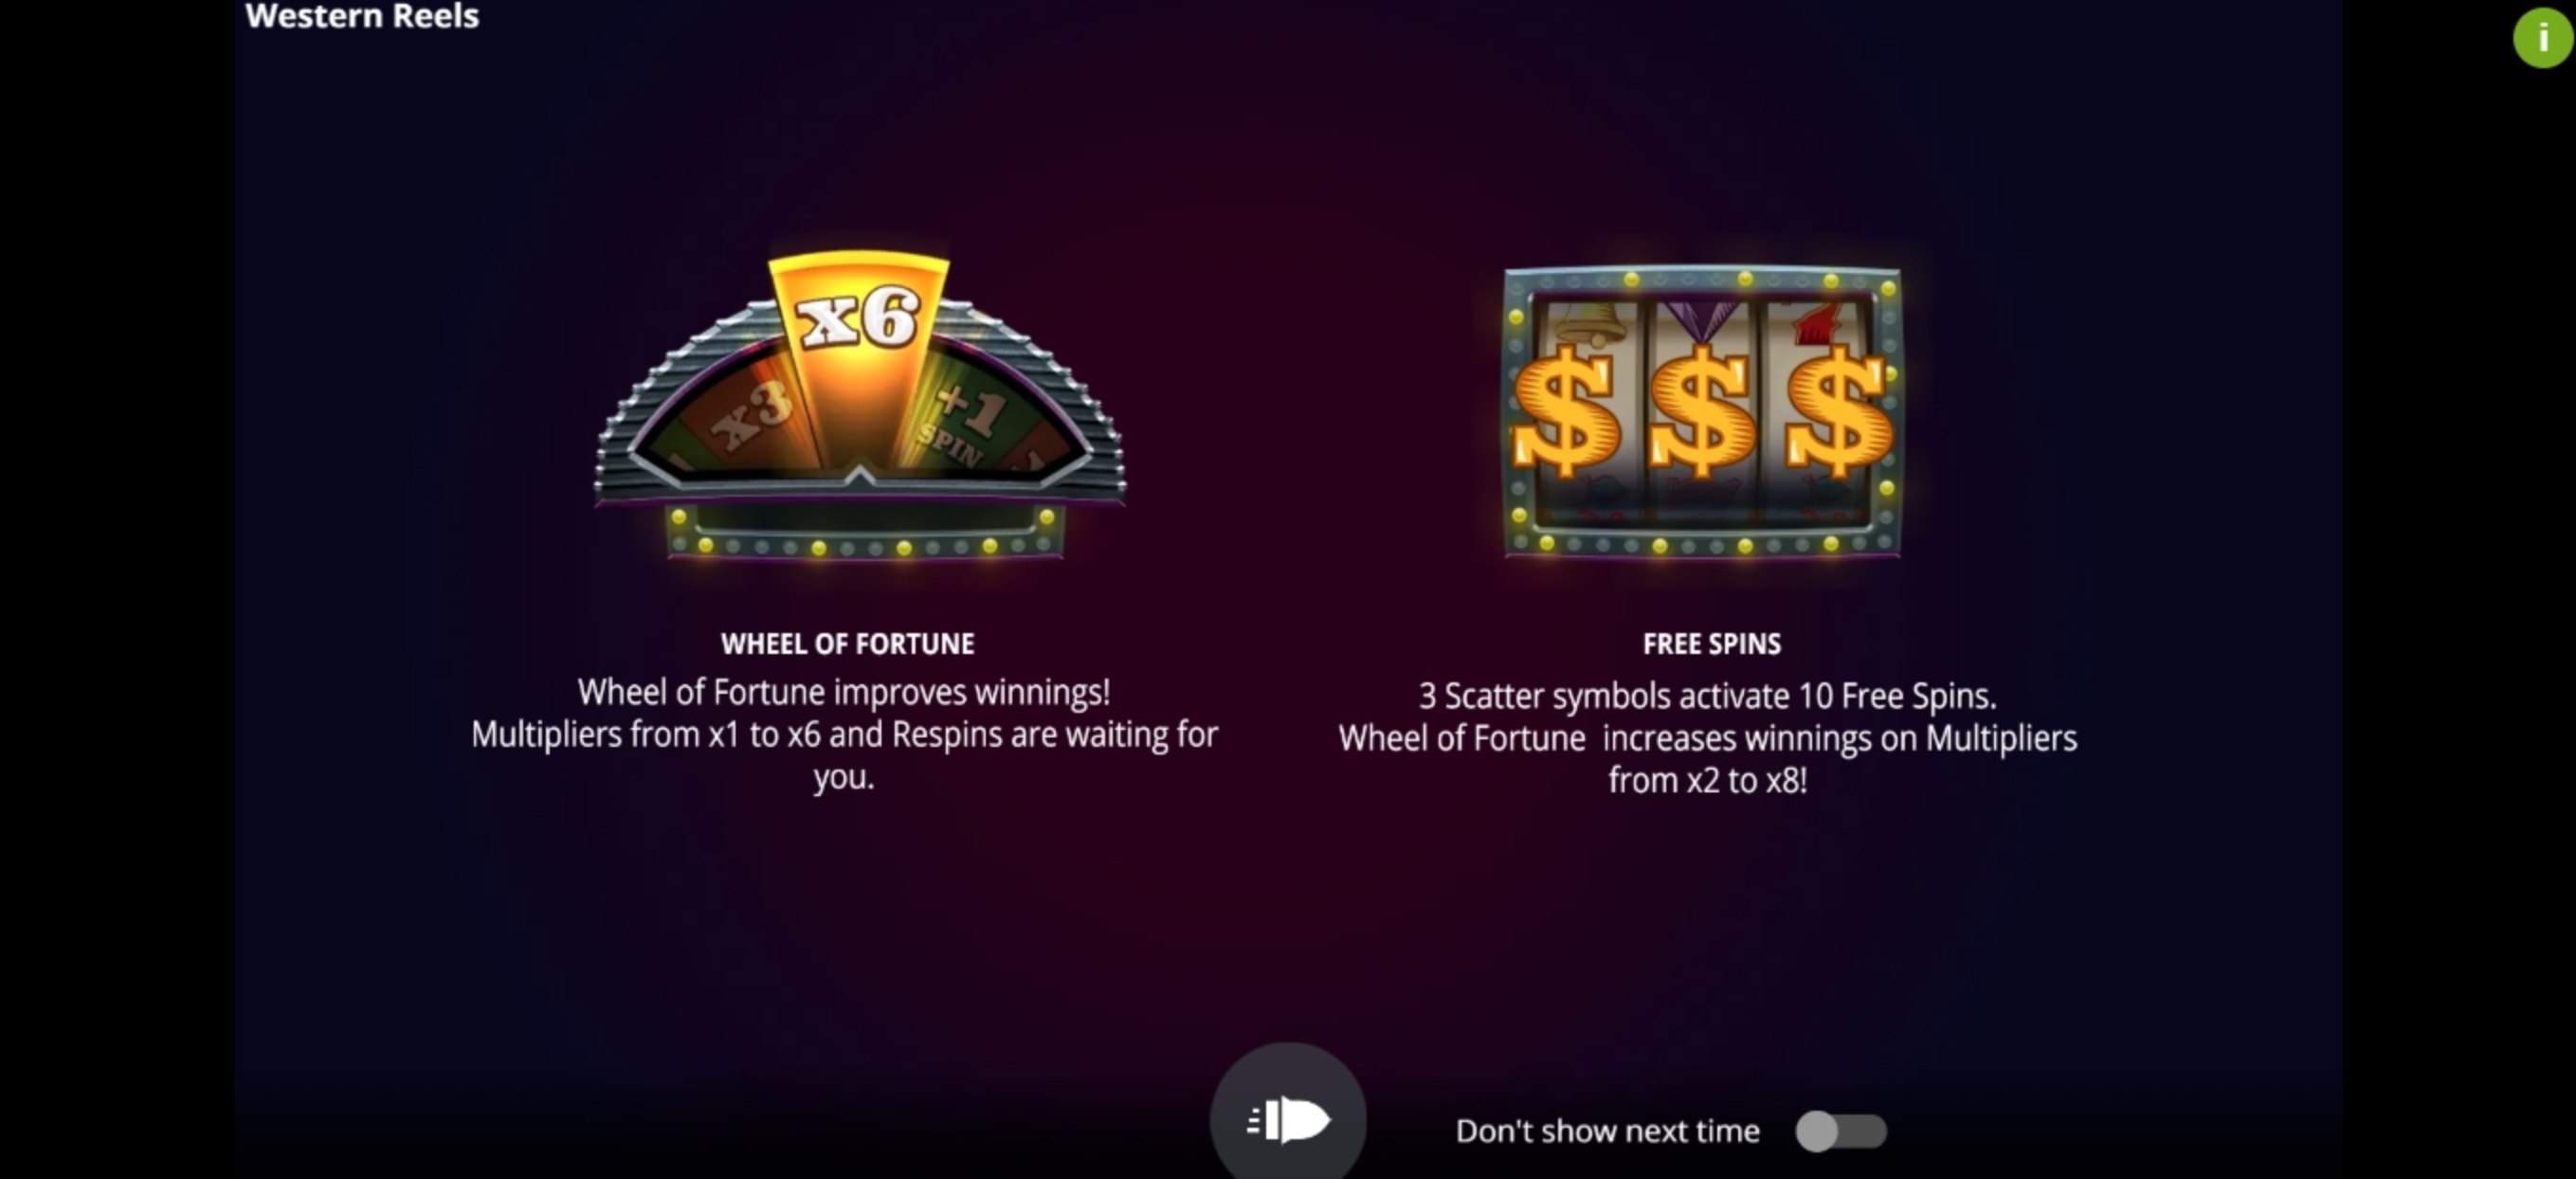 Play Western Reels Free Casino Slot Game by Evoplay Entertainment